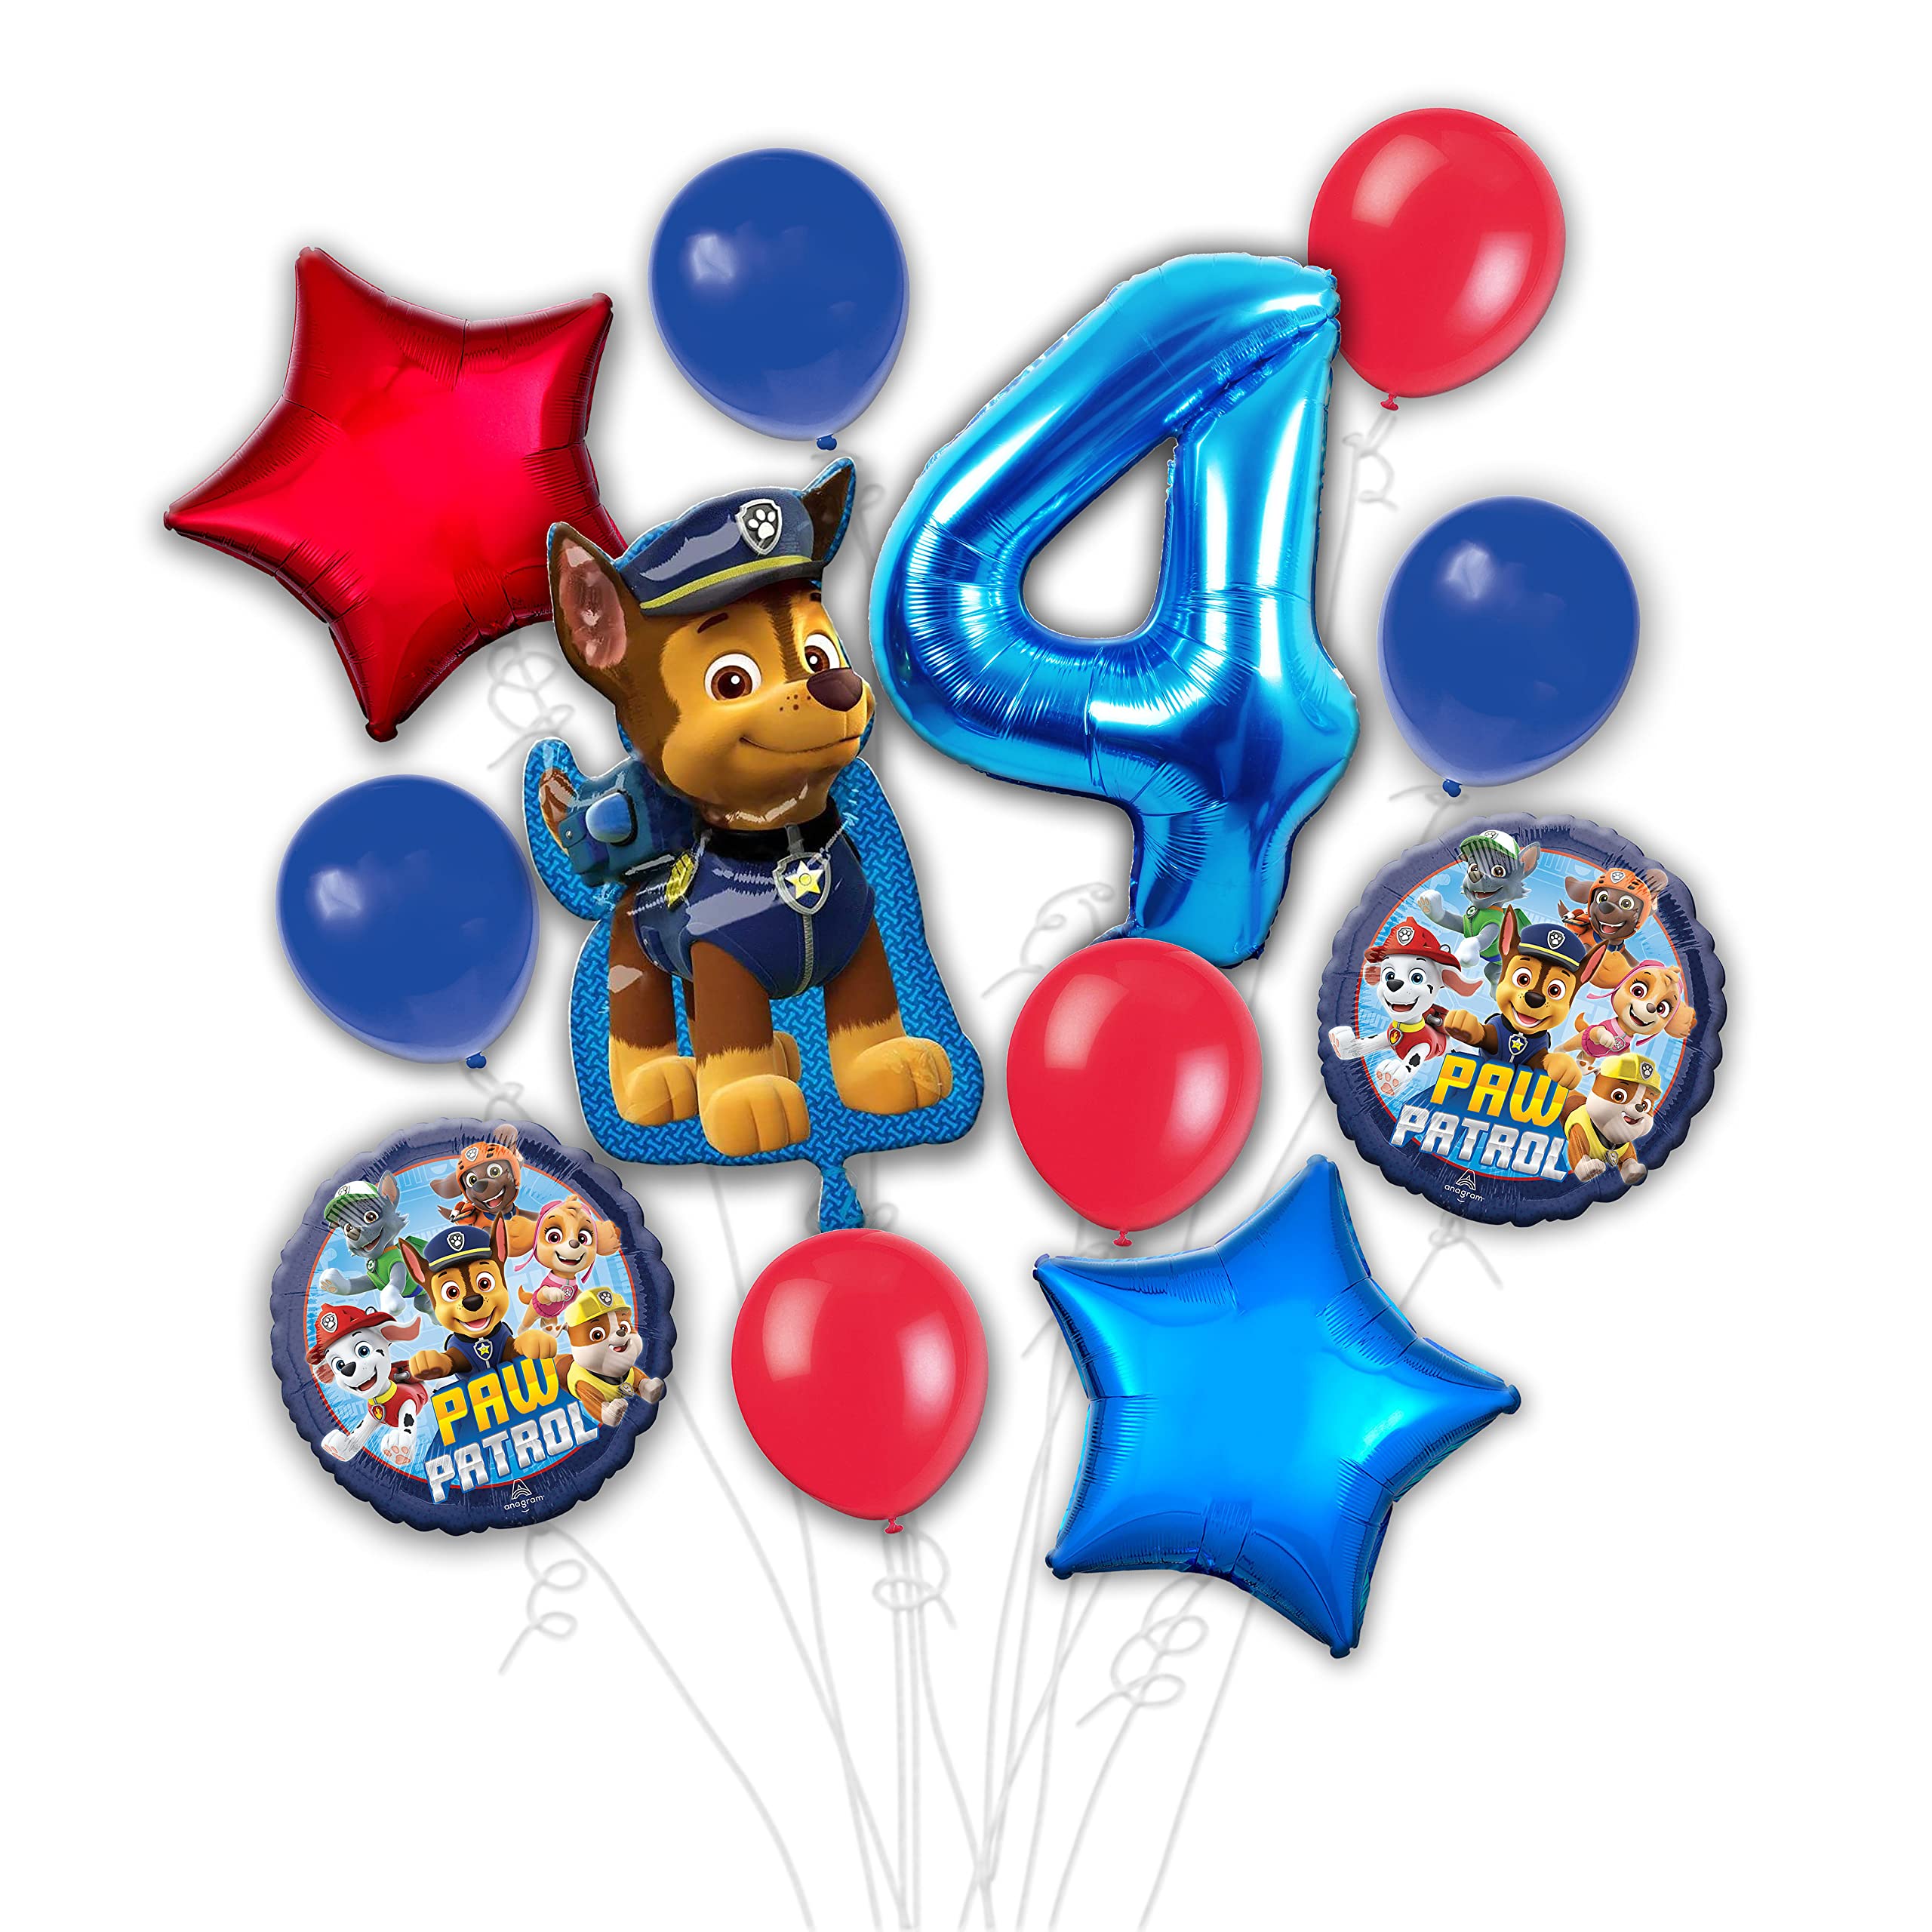 Costume Wizard Customizable 12pc Paw Patrol Birthday Balloon Bouquet - Party Supplies Decoration Bundle - Set of Latex & Foil Helium Balloons